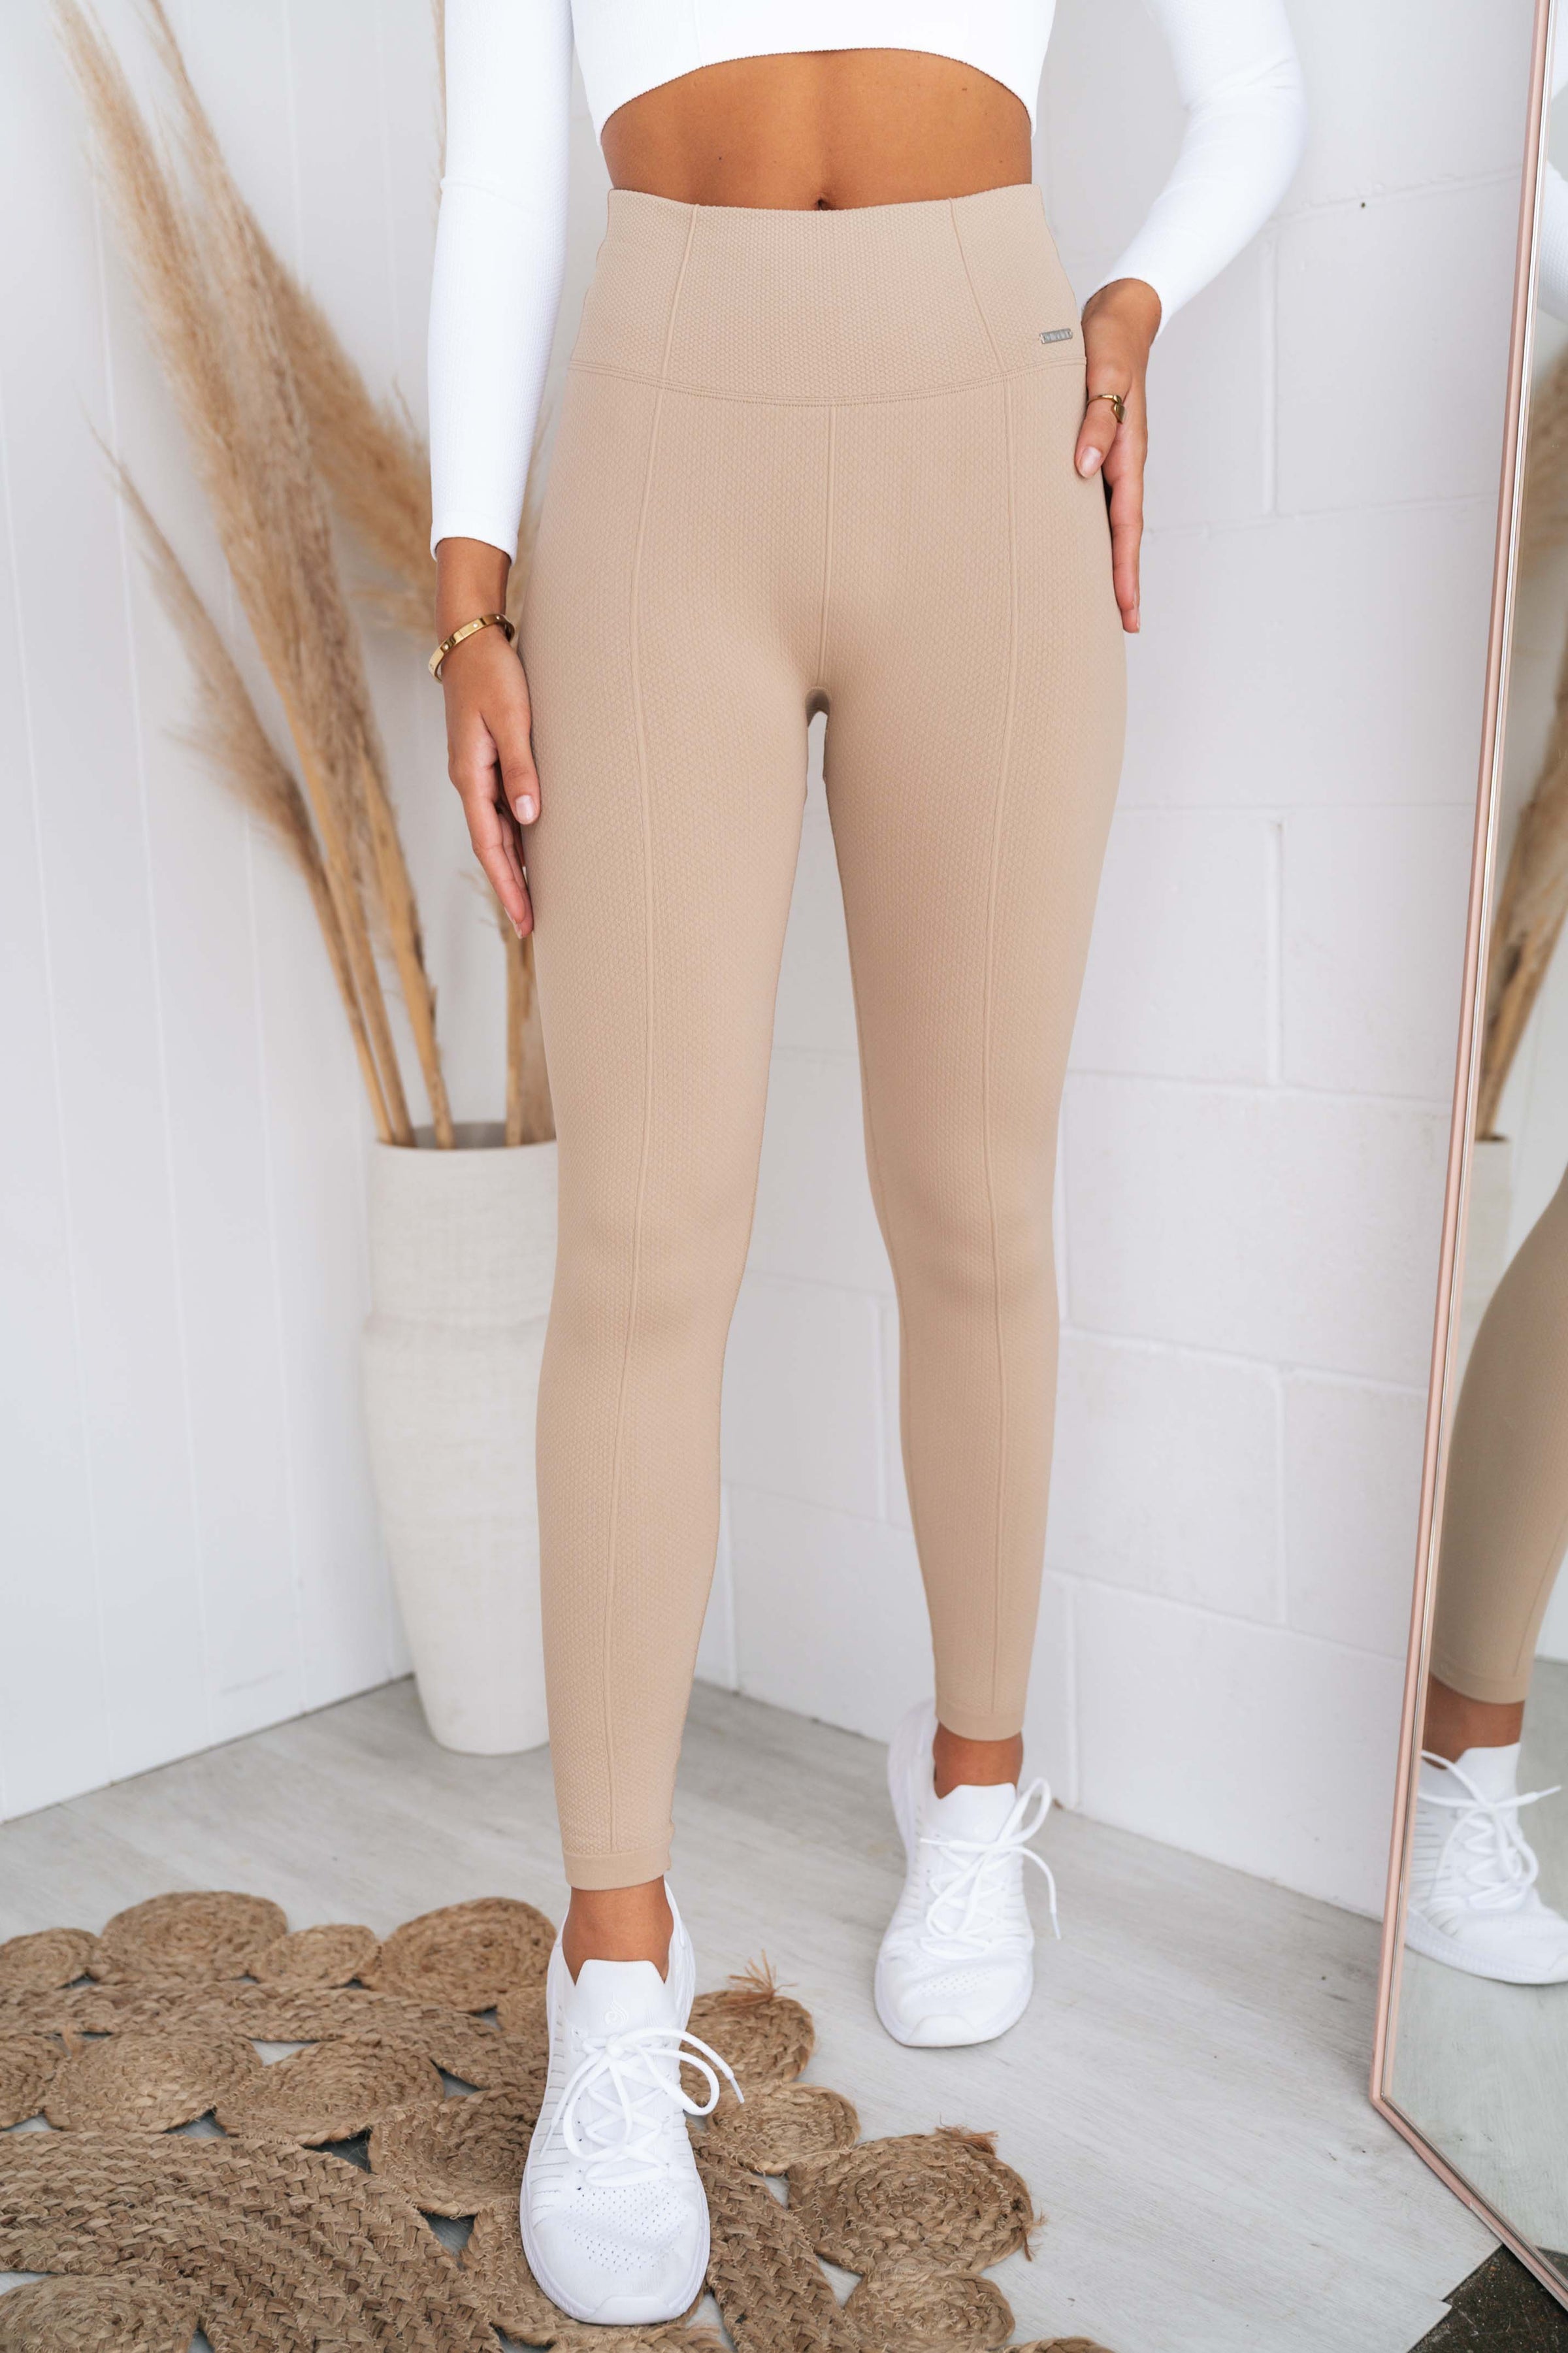 SOLID BEIGE LUXE SEAMLESS TIGHTS – AIMN NZ